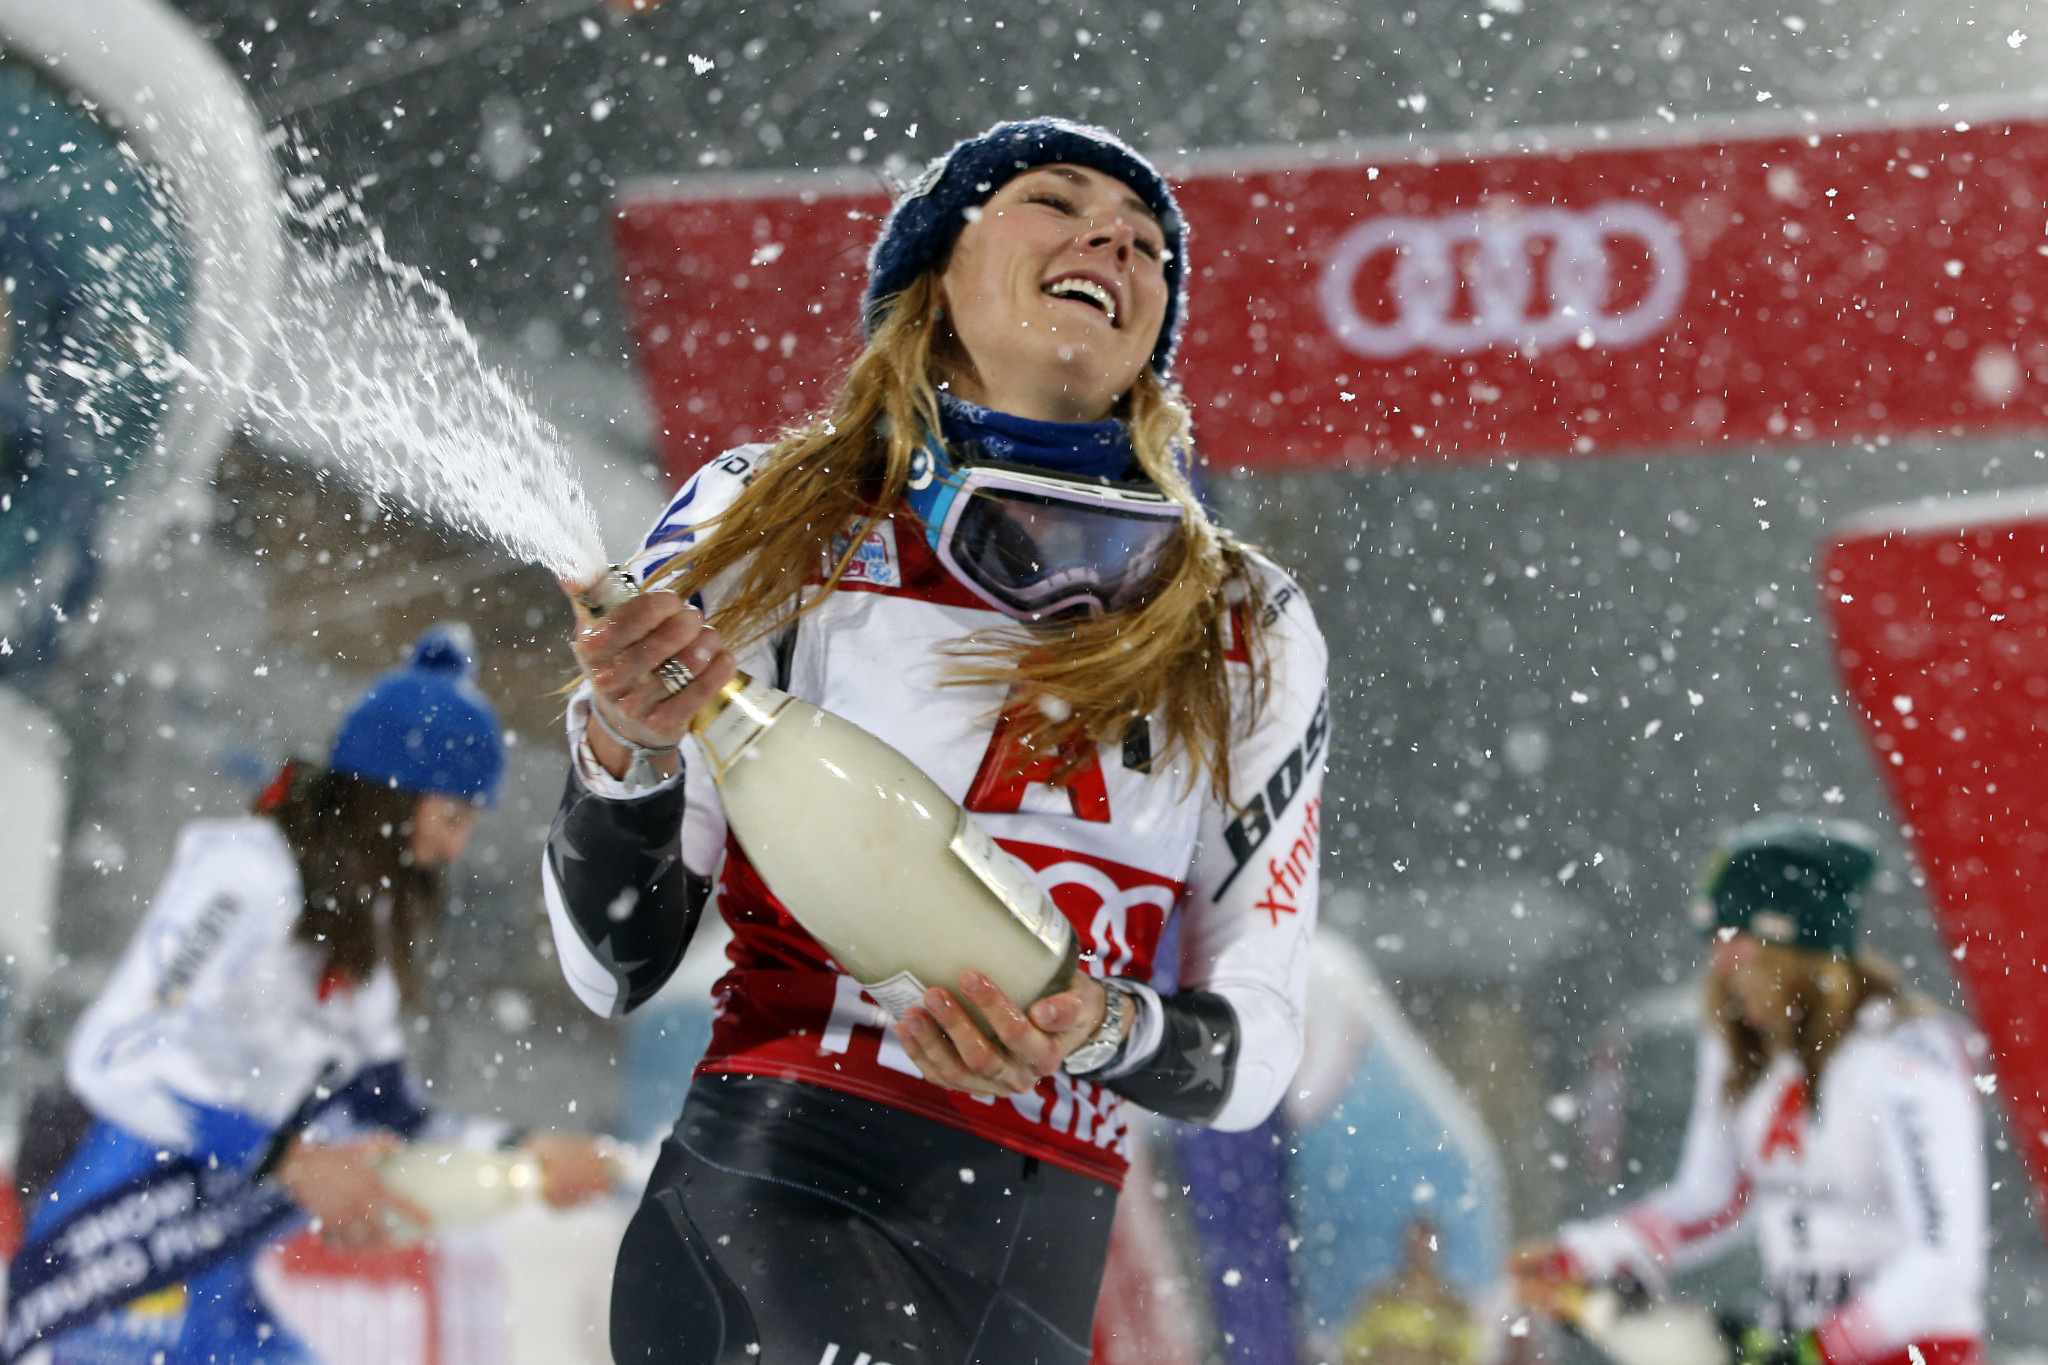 Mikaela Shiffrin, who has won 52 times on the Alpine Skiing World Cup circuit, is considered by some to be the greatest slalom skier of all time ©Getty Images